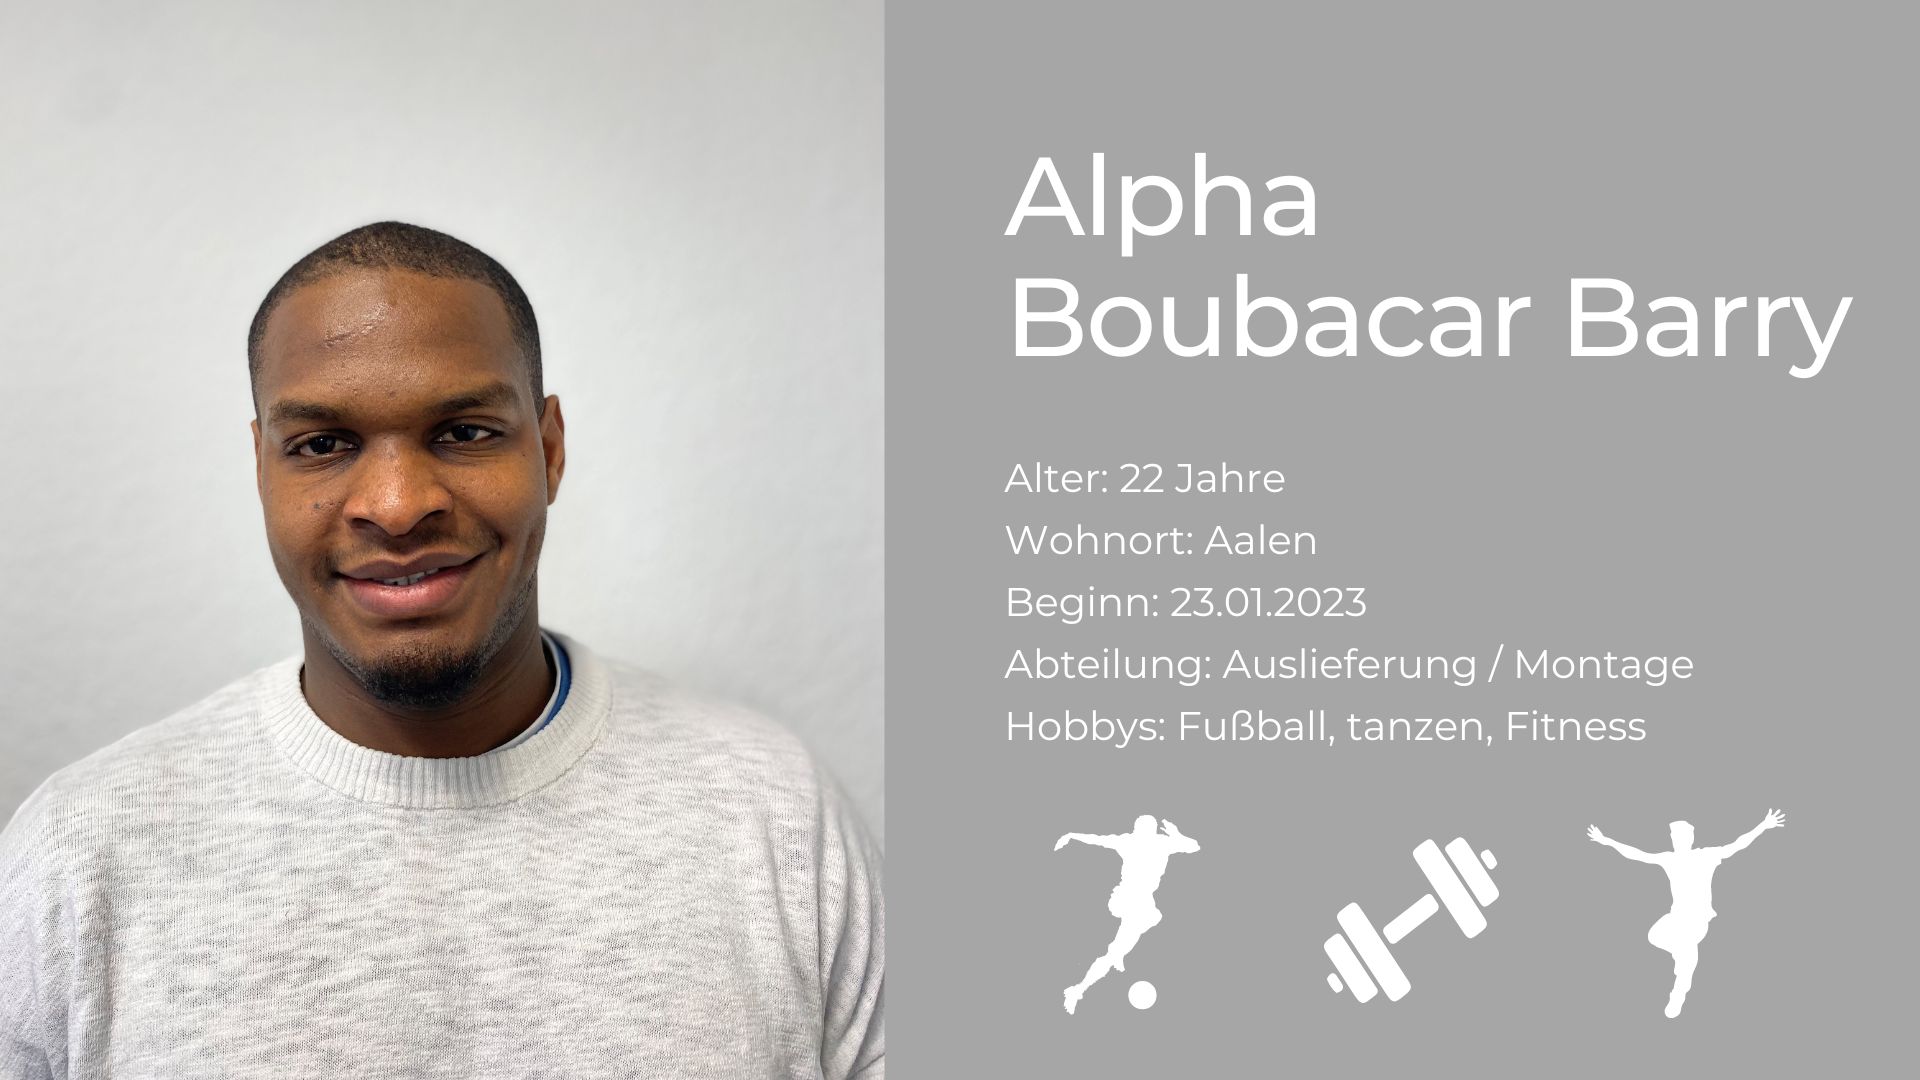 You are currently viewing Herzlichen Willkommen Alpha Boubacar Barry!